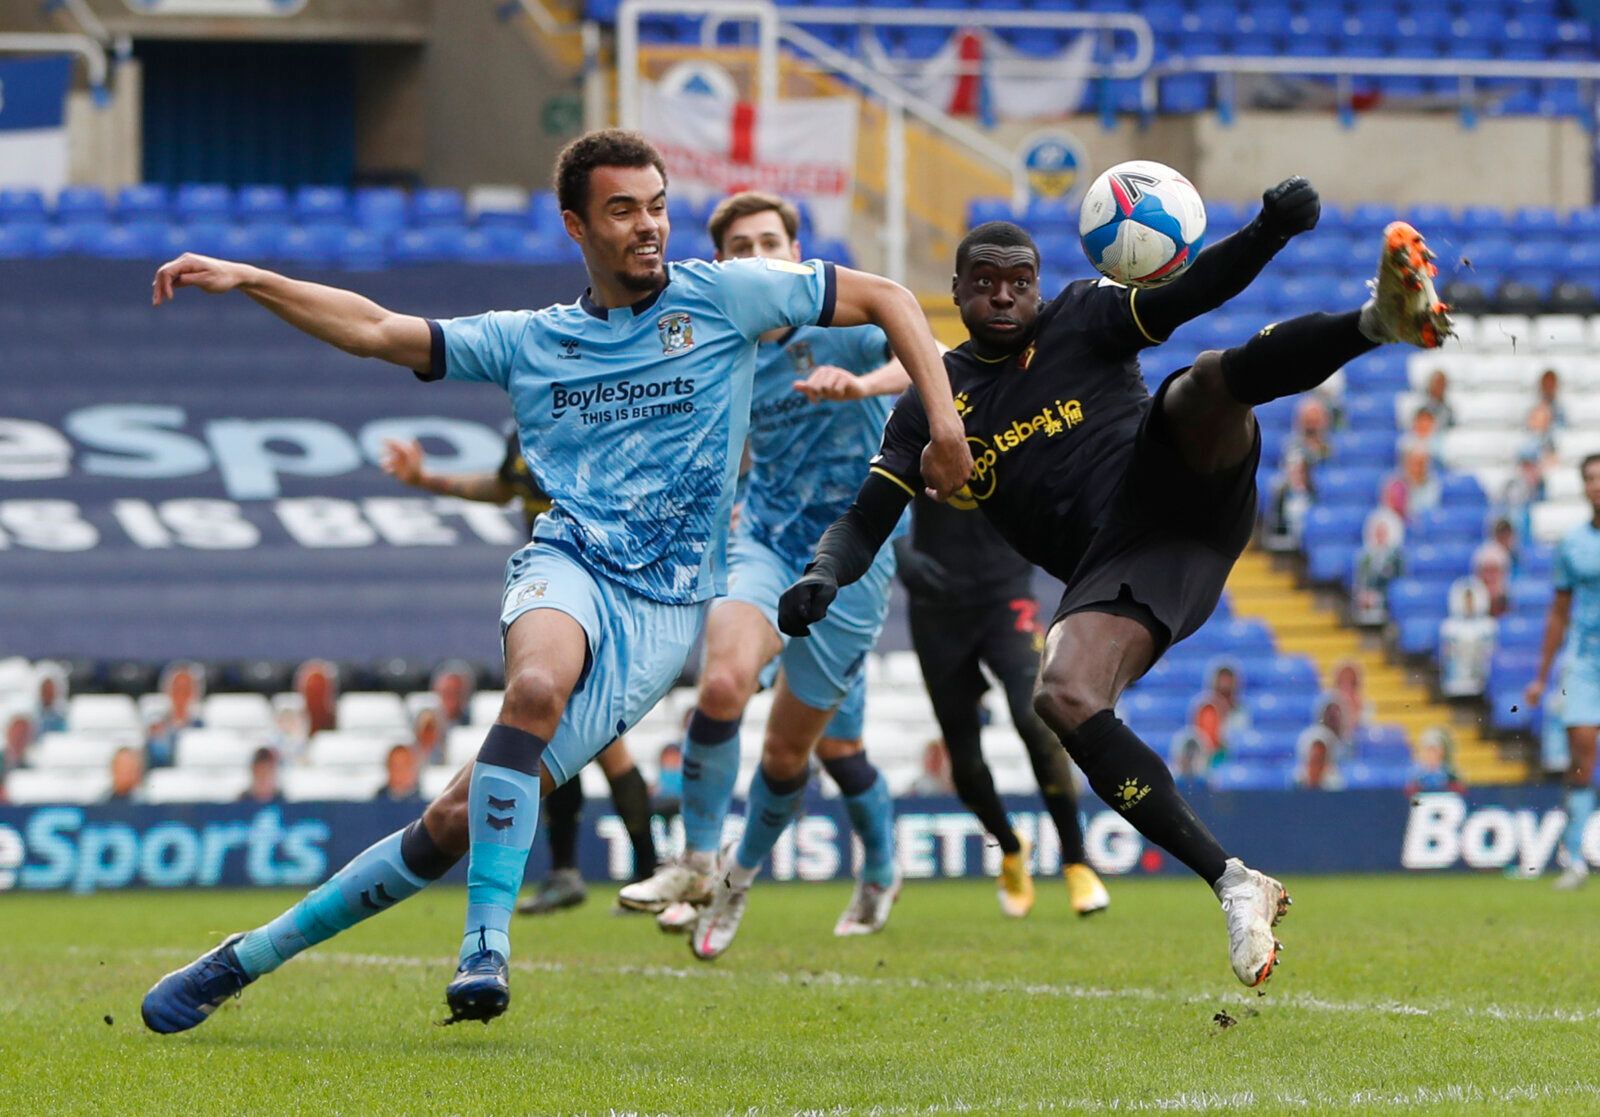 Soccer Football - Championship - Coventry City v Watford - St Andrew's, Birmingham, Britain - February 6, 2021 Watford's Ken Sema in action with Coventry City's Josh Pask Action Images/Paul Childs EDITORIAL USE ONLY. No use with unauthorized audio, video, data, fixture lists, club/league logos or 'live' services. Online in-match use limited to 75 images, no video emulation. No use in betting, games or single club /league/player publications.  Please contact your account representative for furthe